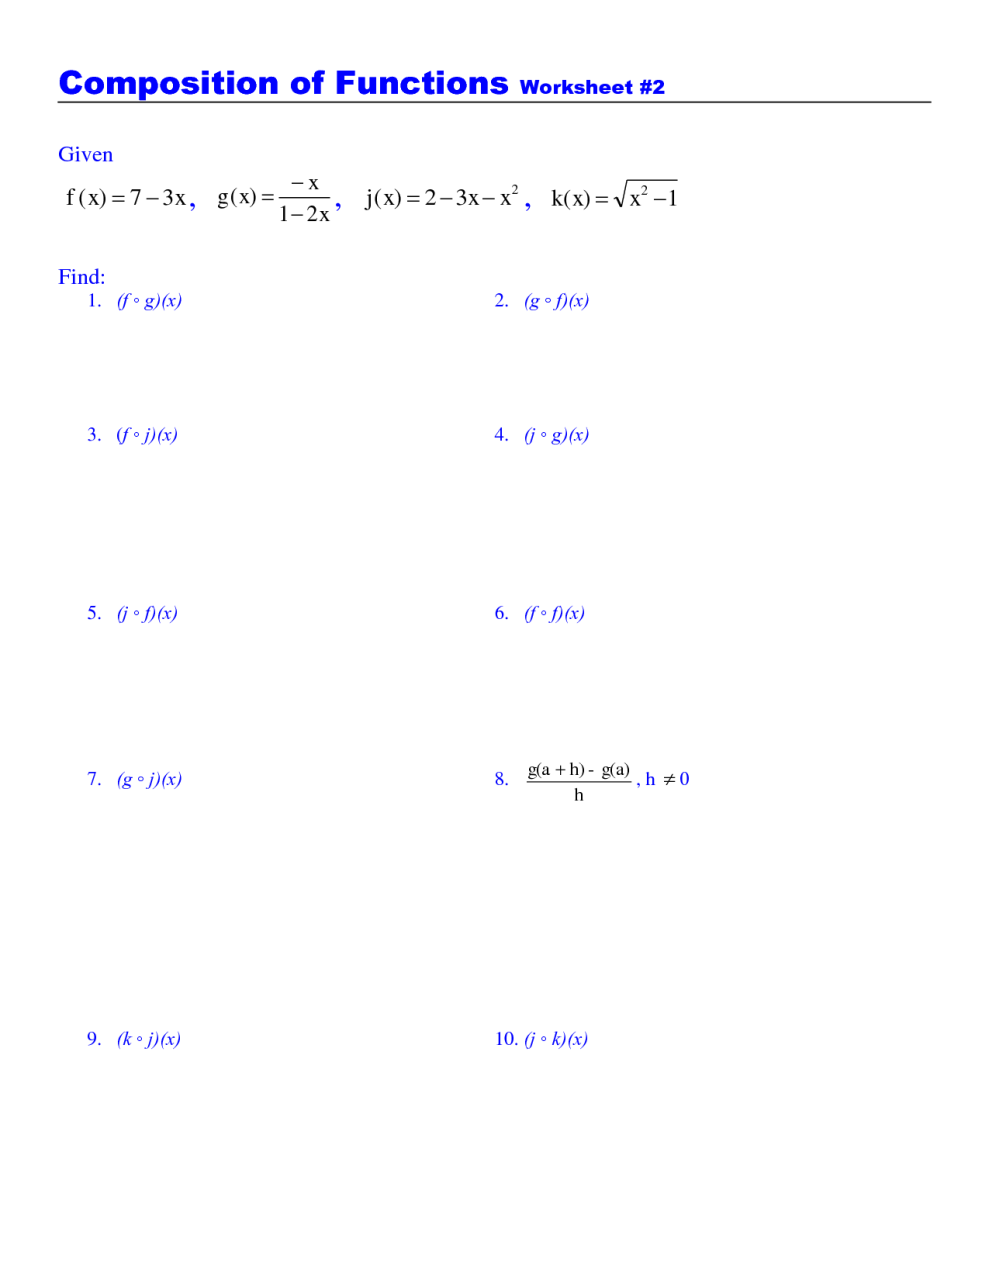 11th Grade Composition Of Functions Worksheet